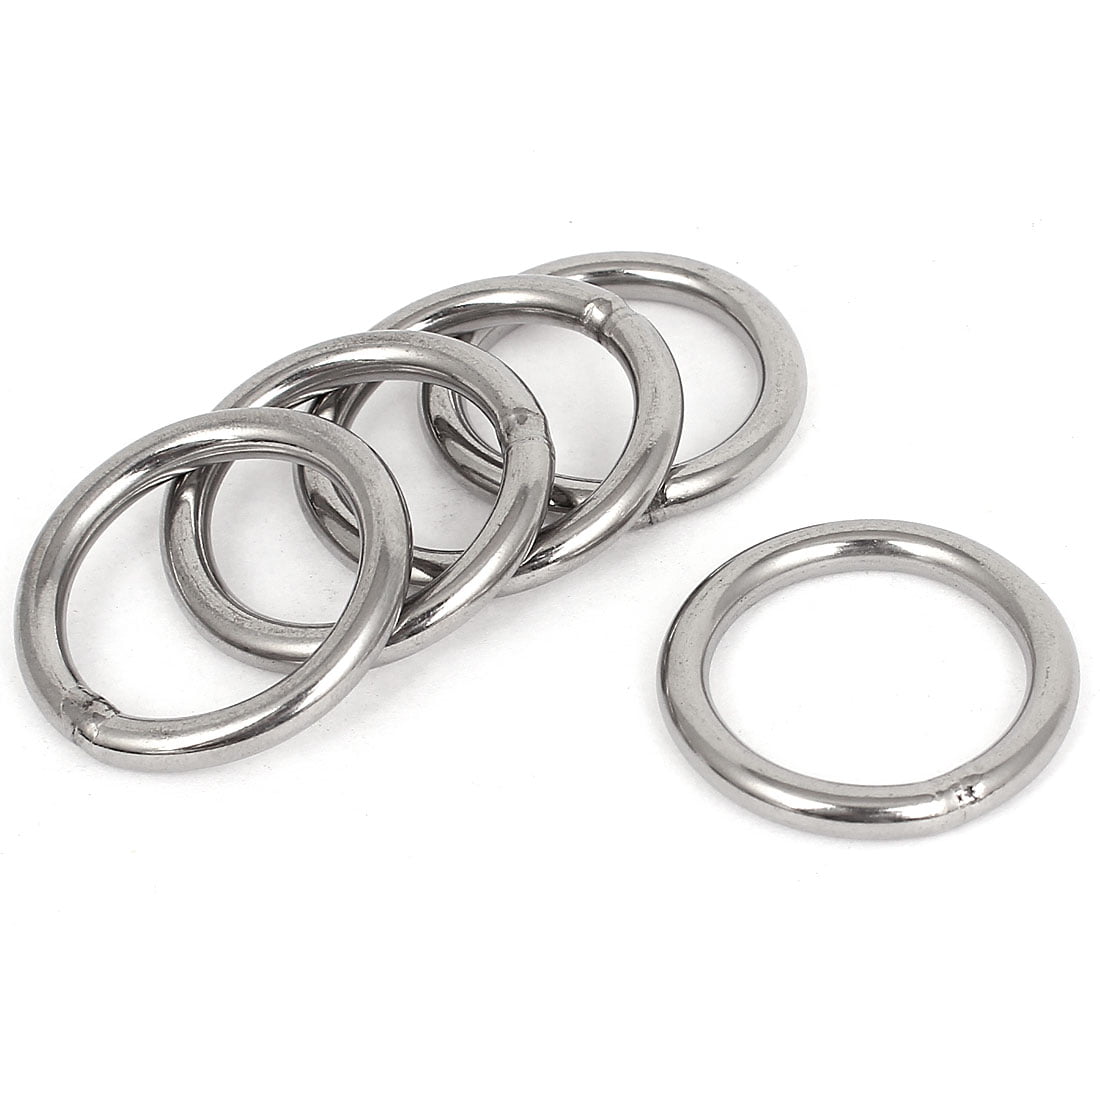 Details about   20mm Welded O Rings DIY Belts Luggage Shower Curtain Stainless Steel Buckle 